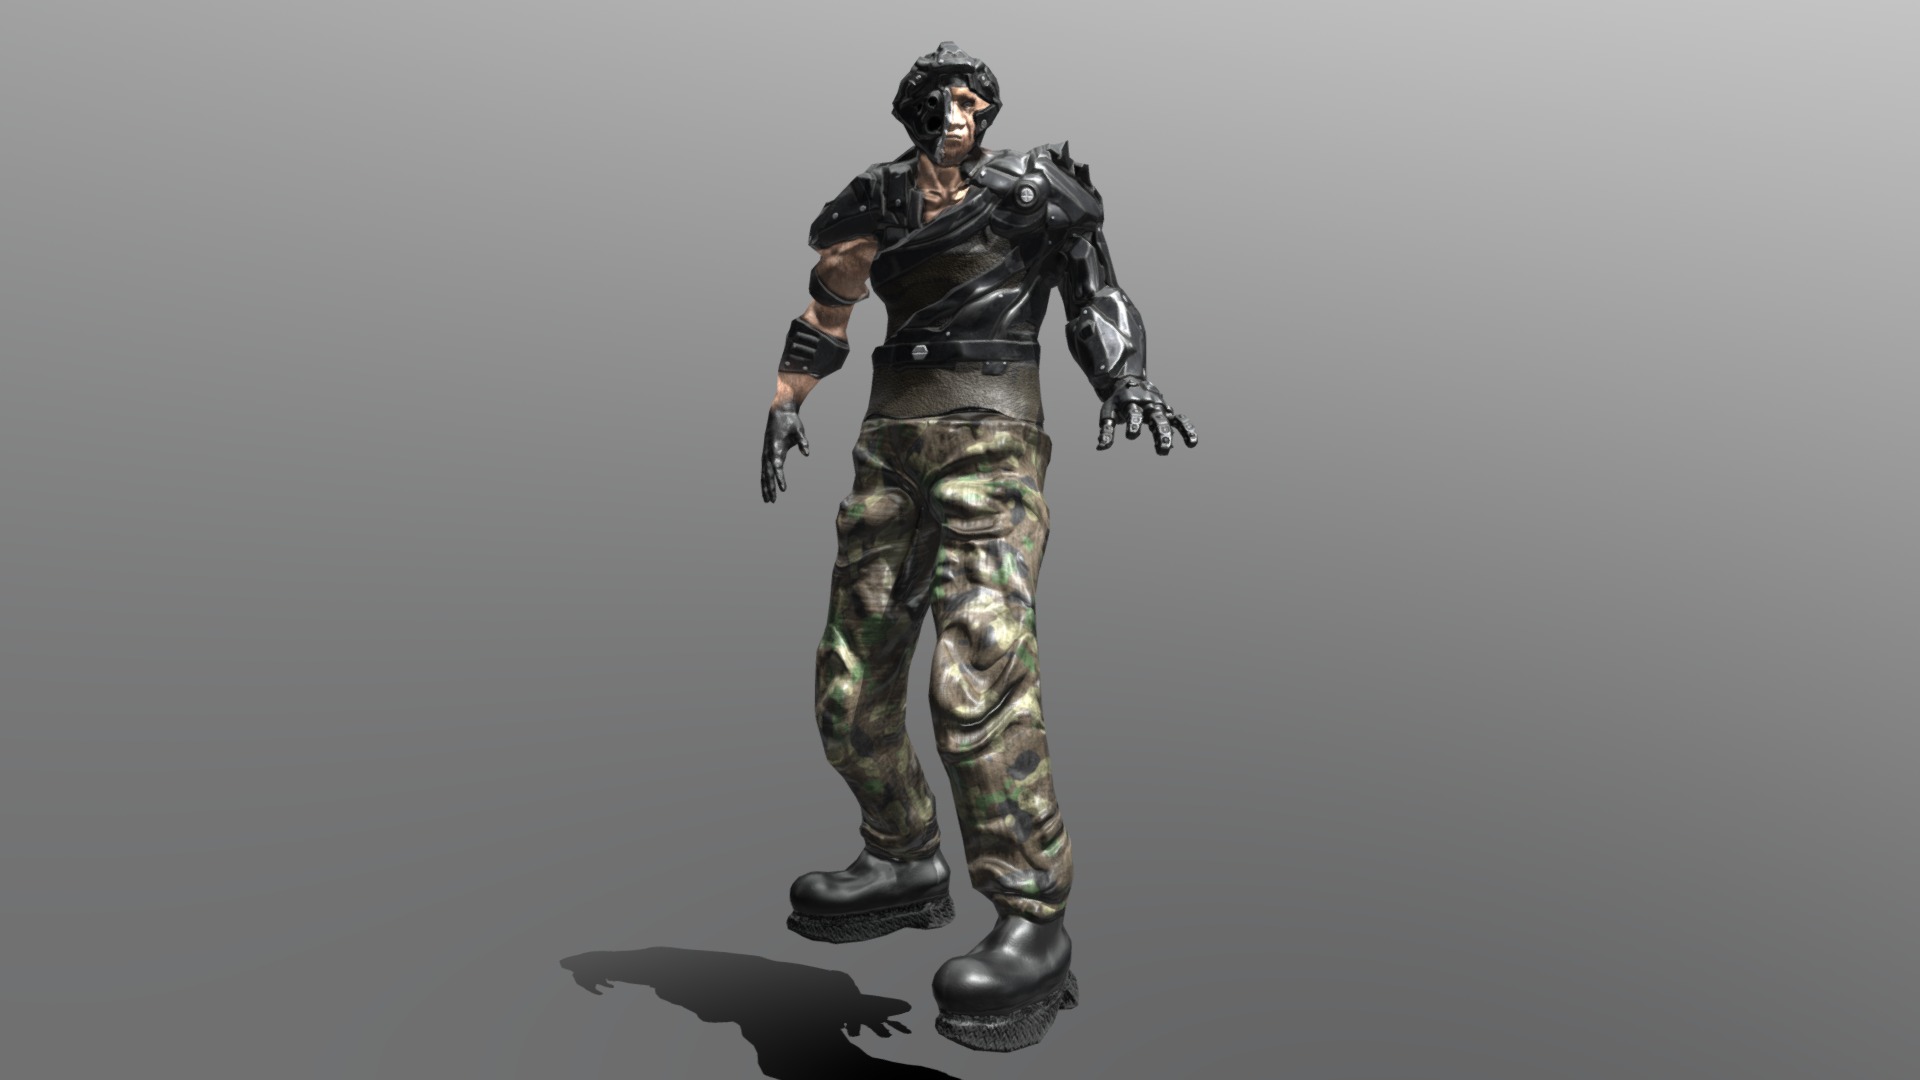 3D model Soldier Cyber Animation - This is a 3D model of the Soldier Cyber Animation. The 3D model is about a man in military uniform.